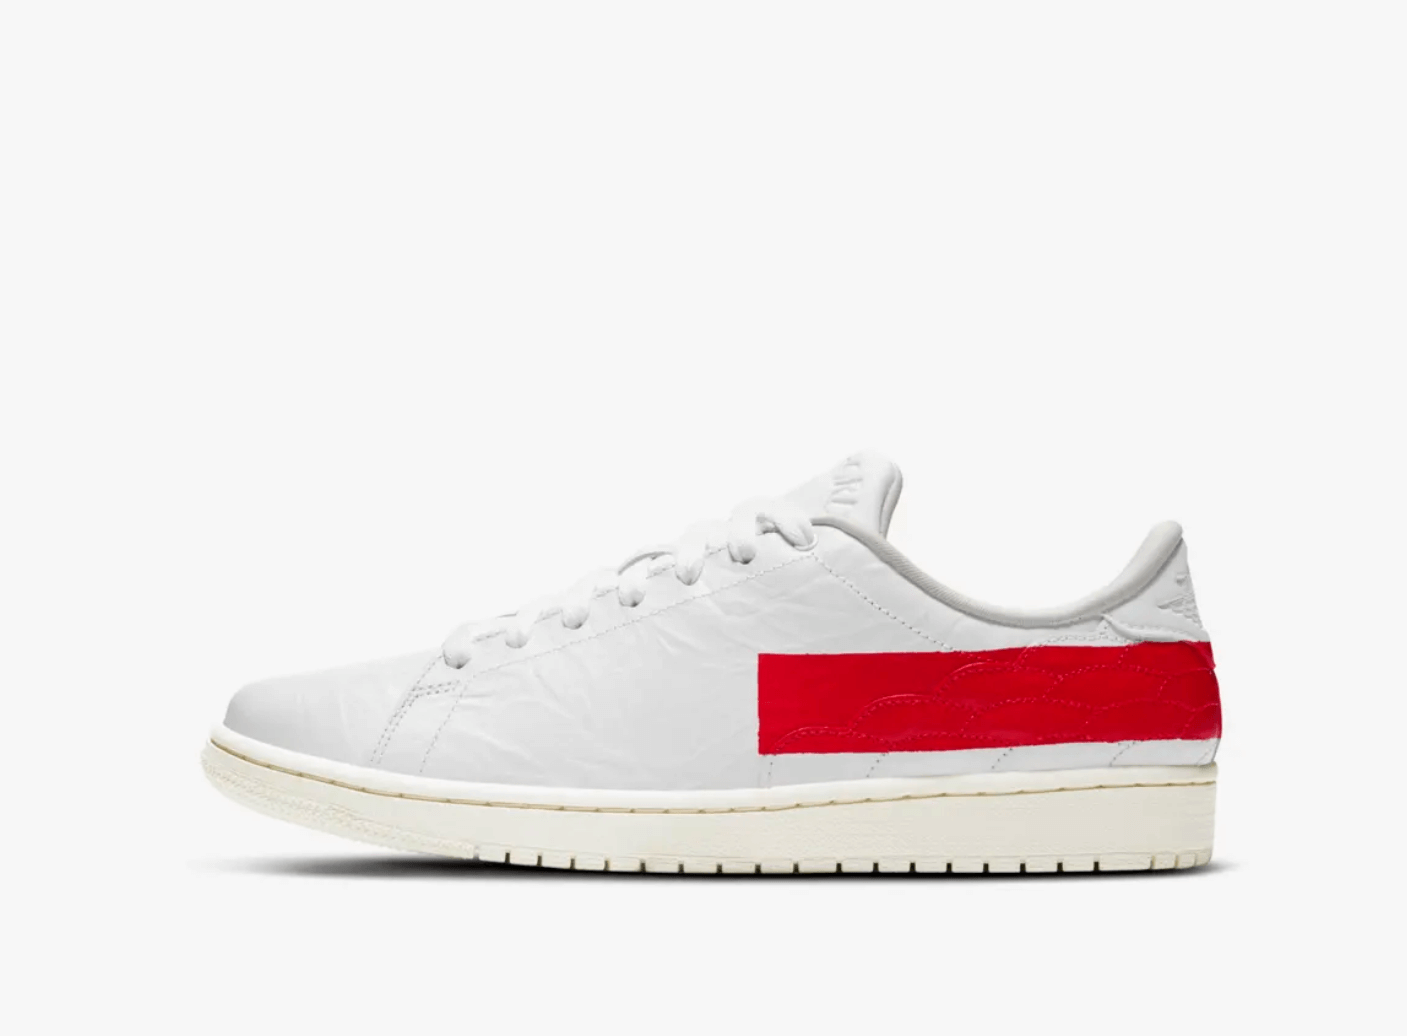 zapatillas Air Jordan 1 Centre Court White and University Red 2021